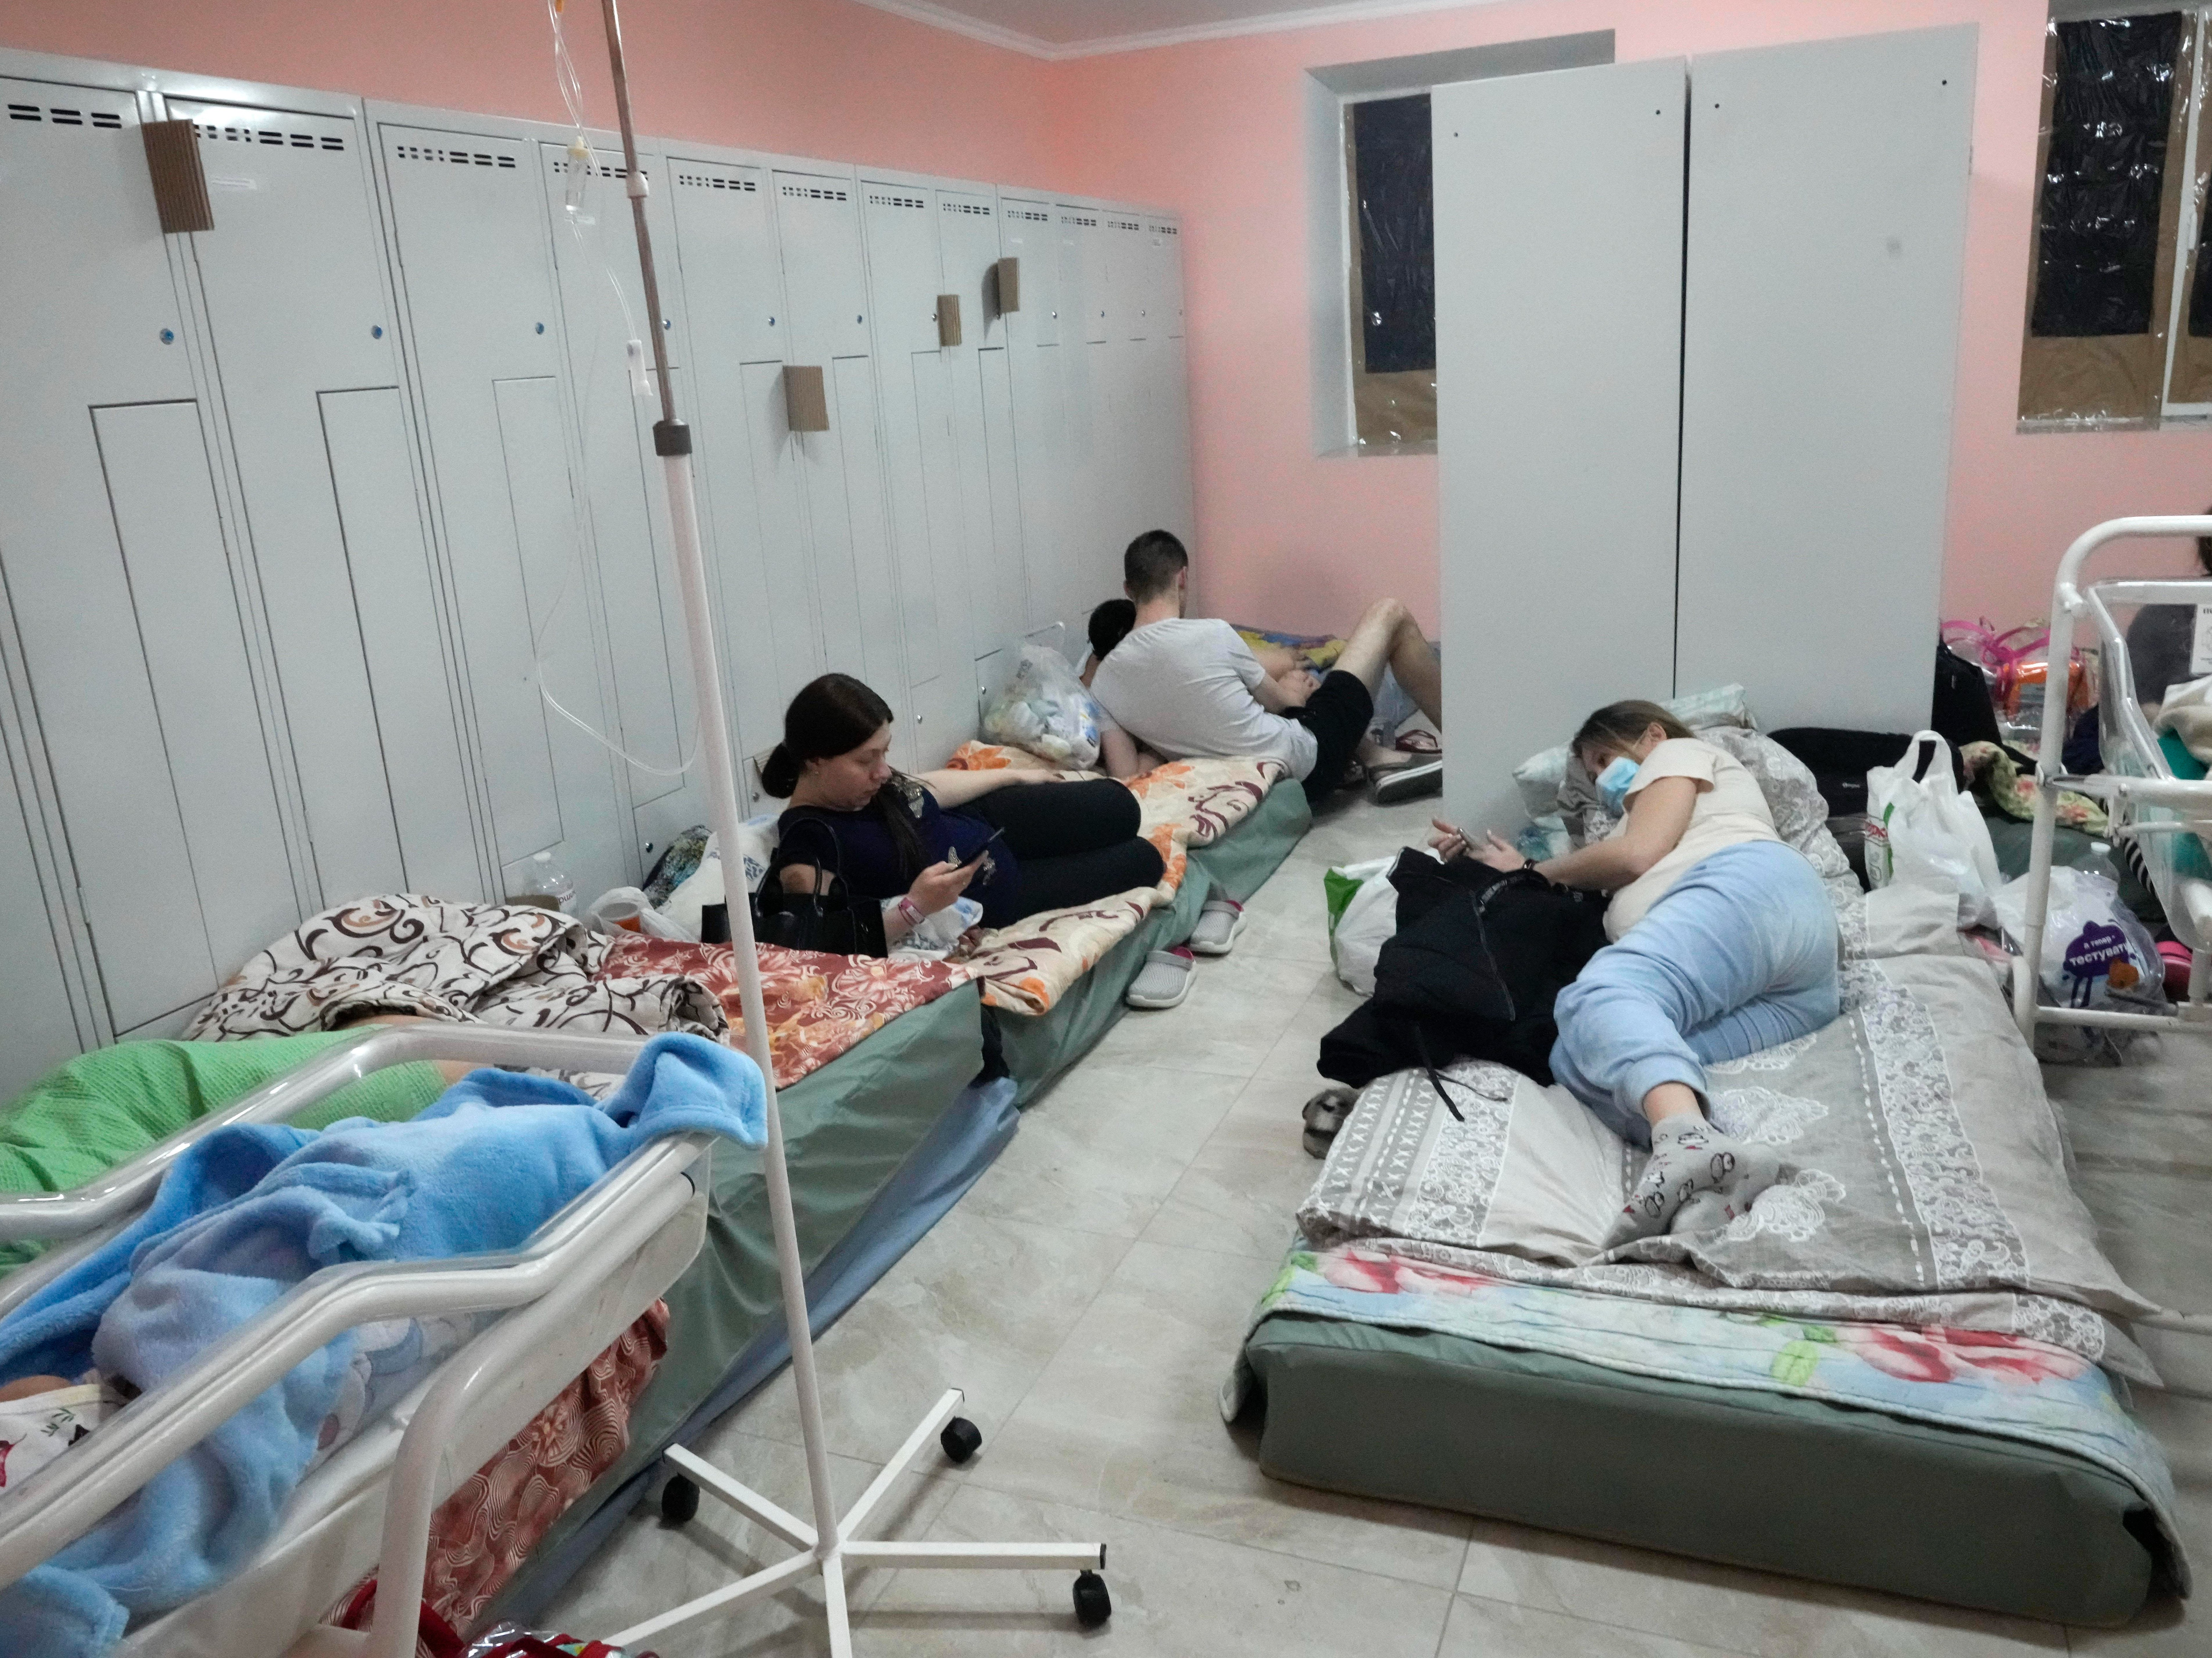 Pregnant women and newborn babies in the basement of a maternity hospital in Kyiv